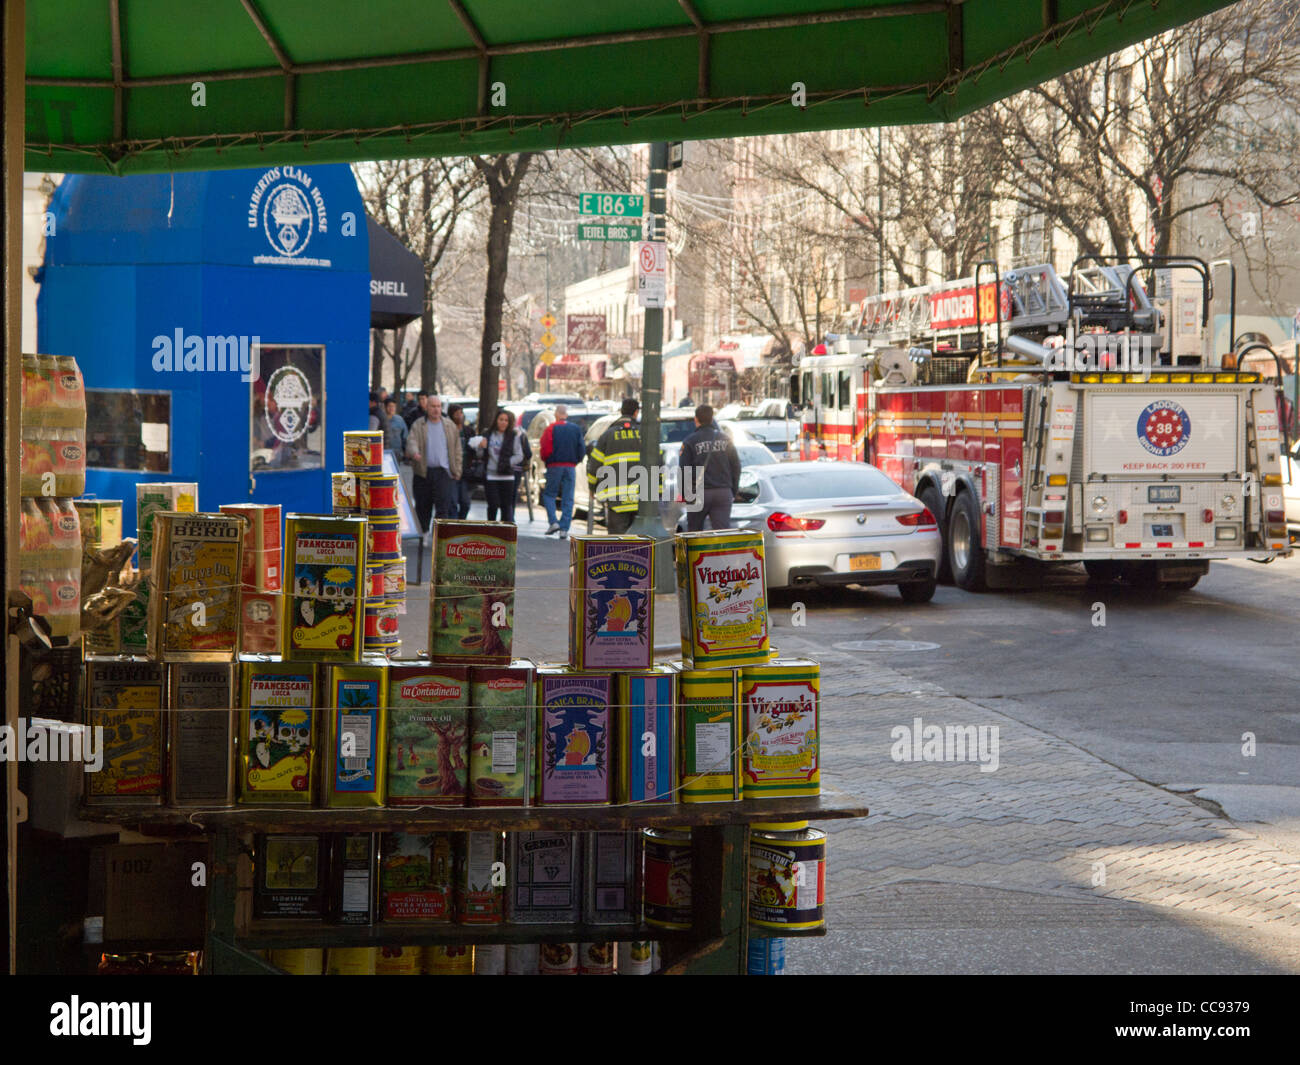 olive oil and a fire engine, Arthur Avenue, The Bronx, New York Stock Photo  - Alamy